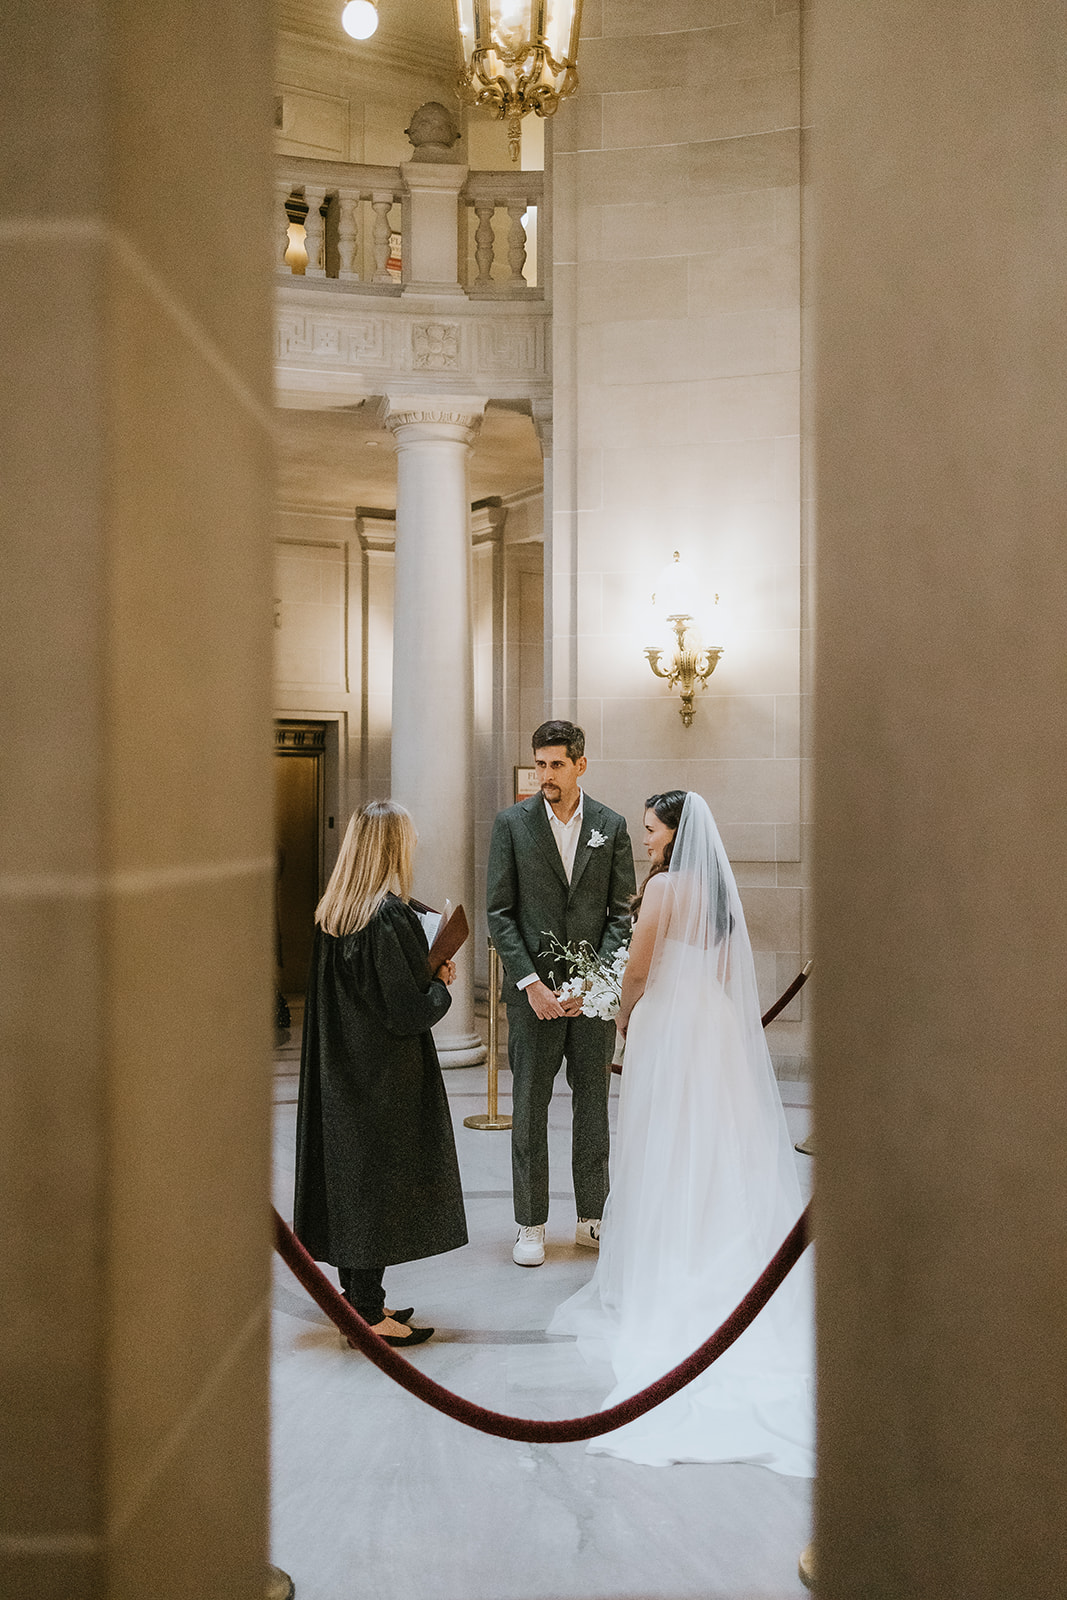 Saying their vows at the Rotunda in SF City Hall